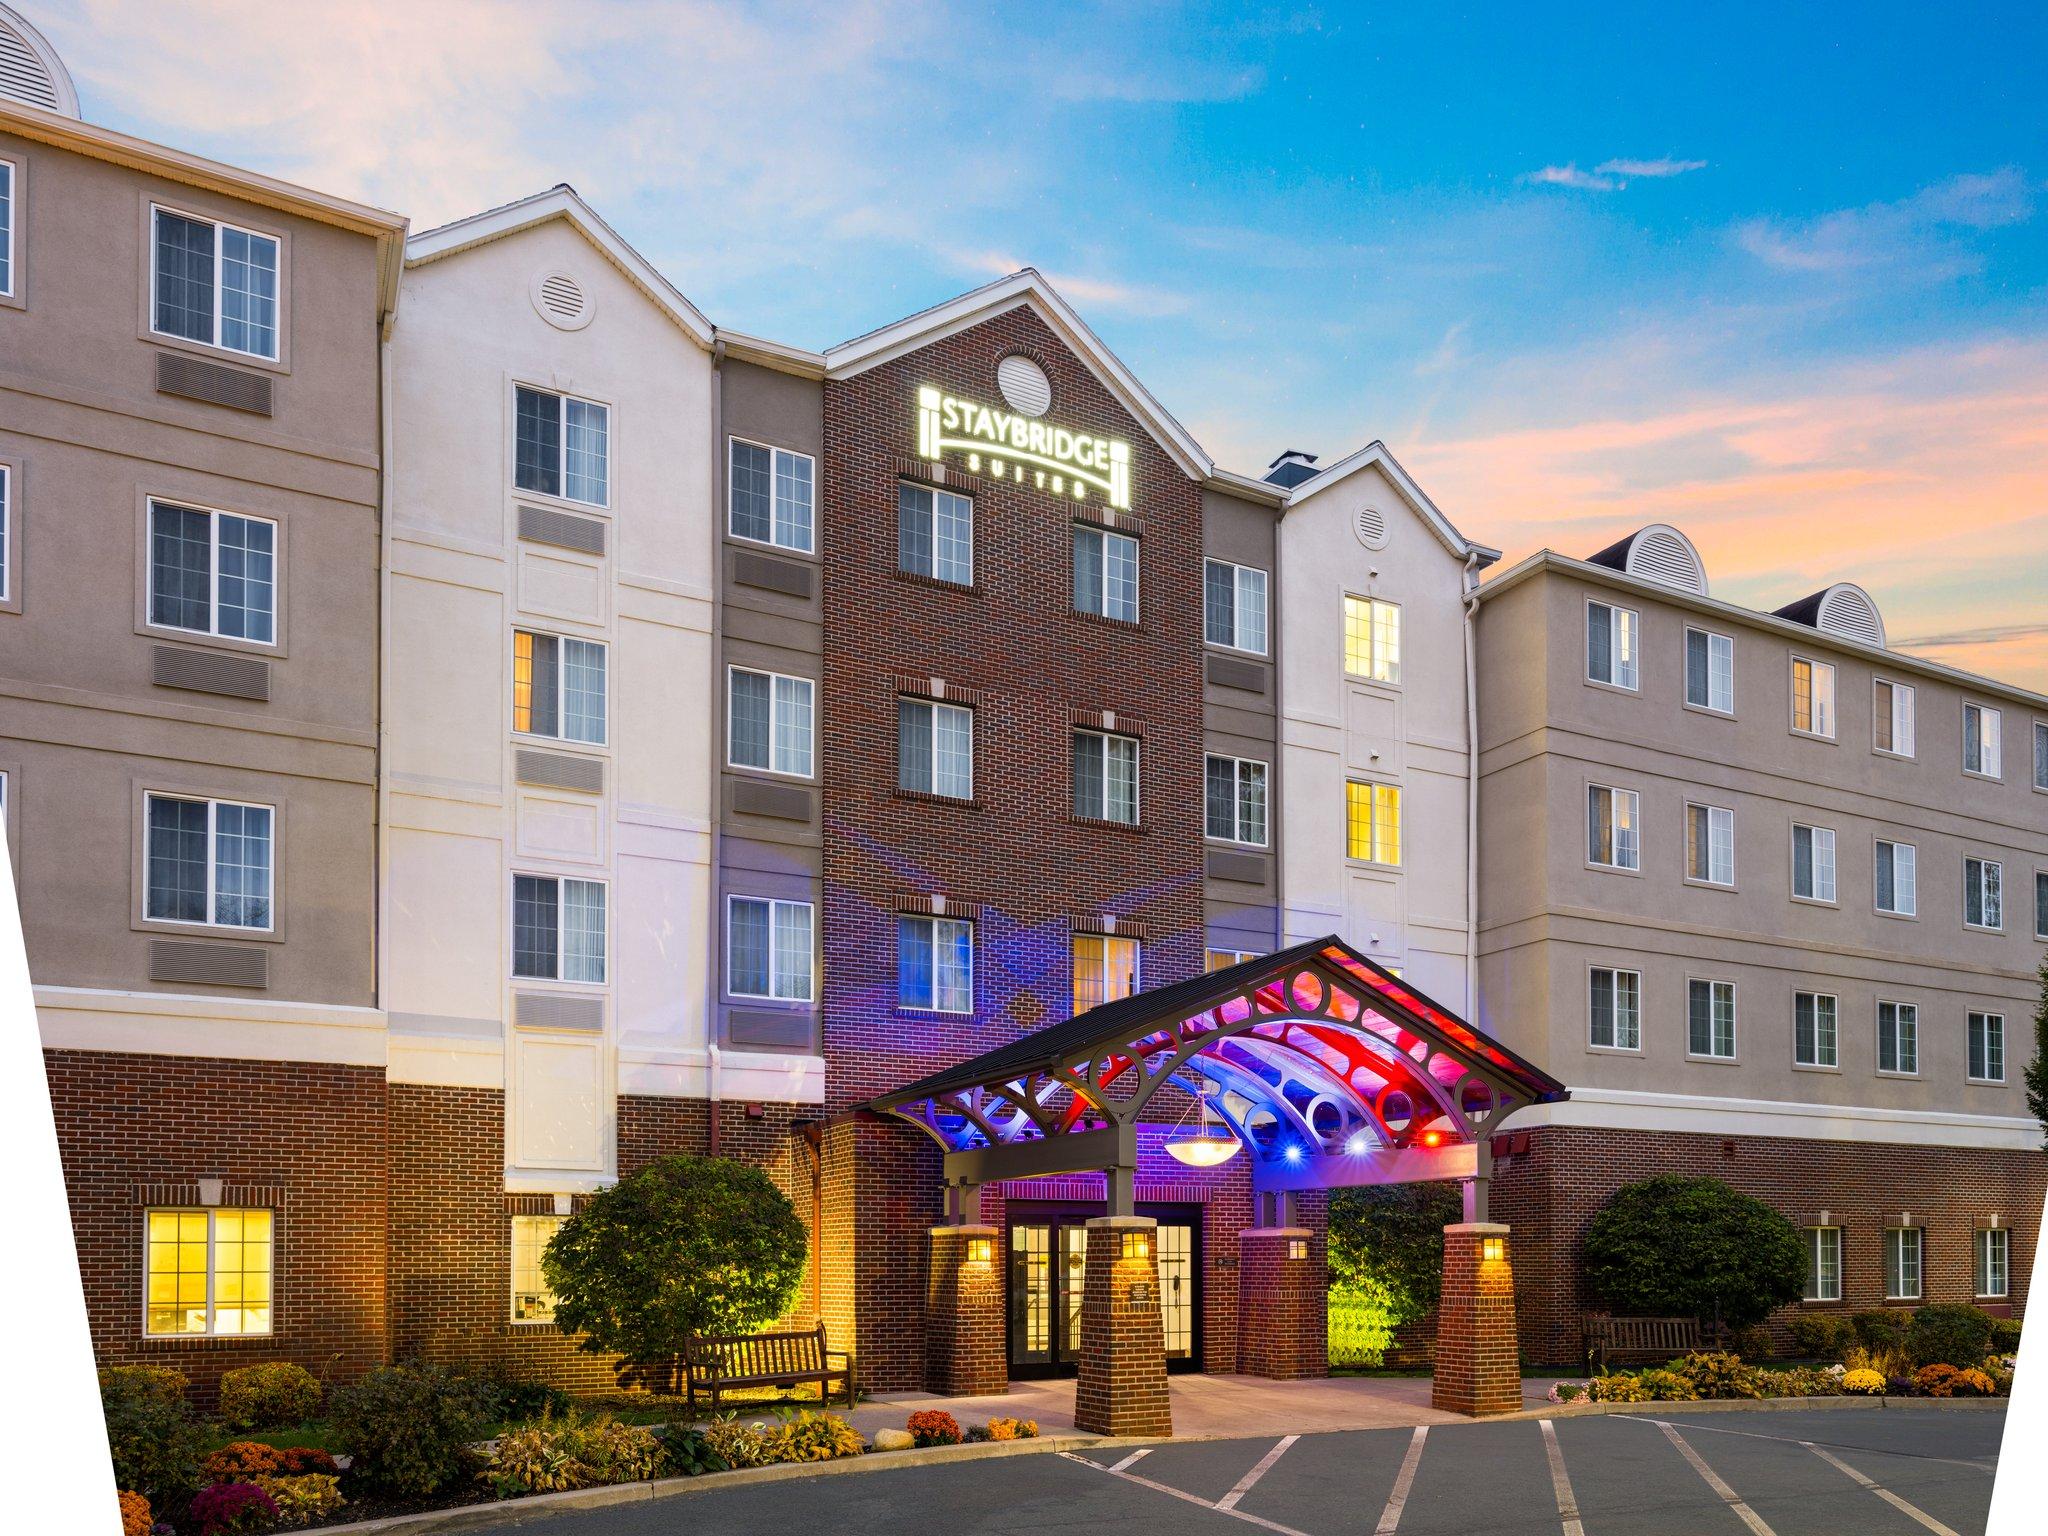 Staybridge Suites Rochester University in Rochester, NY